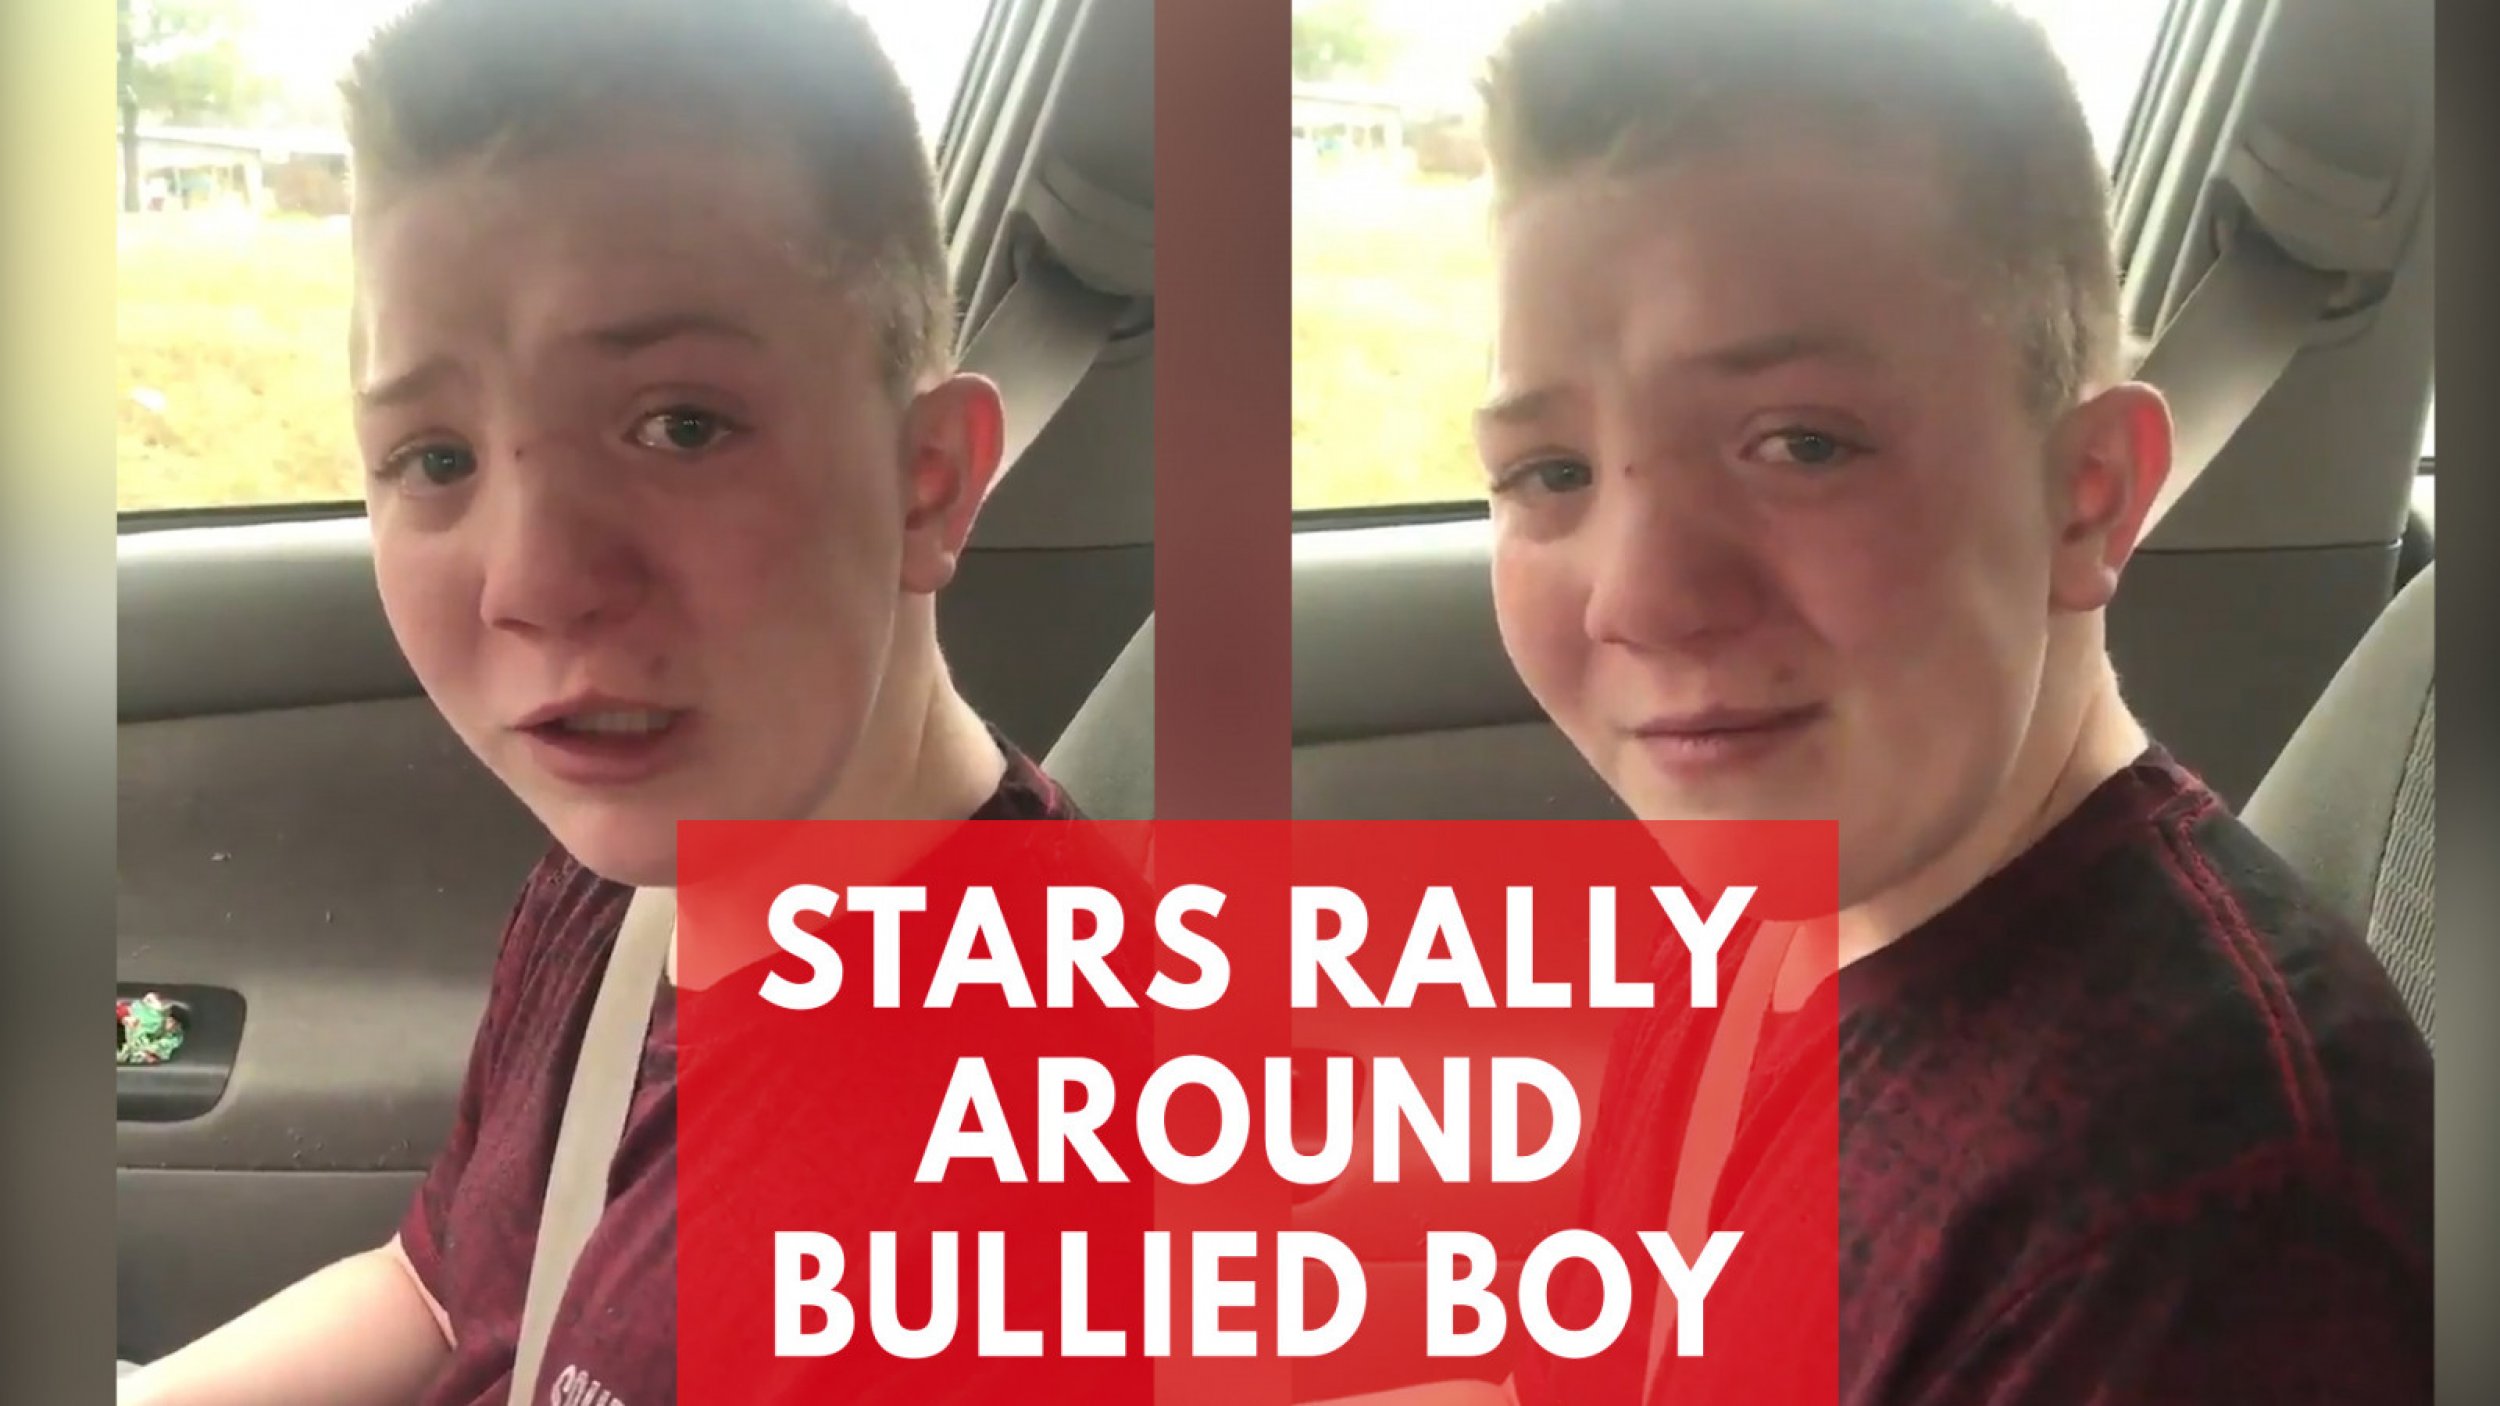 Justin Bieber, Chris Evans, Other Celebrities Rally Support For Keaton Jones After Emotional Video Goes Viral